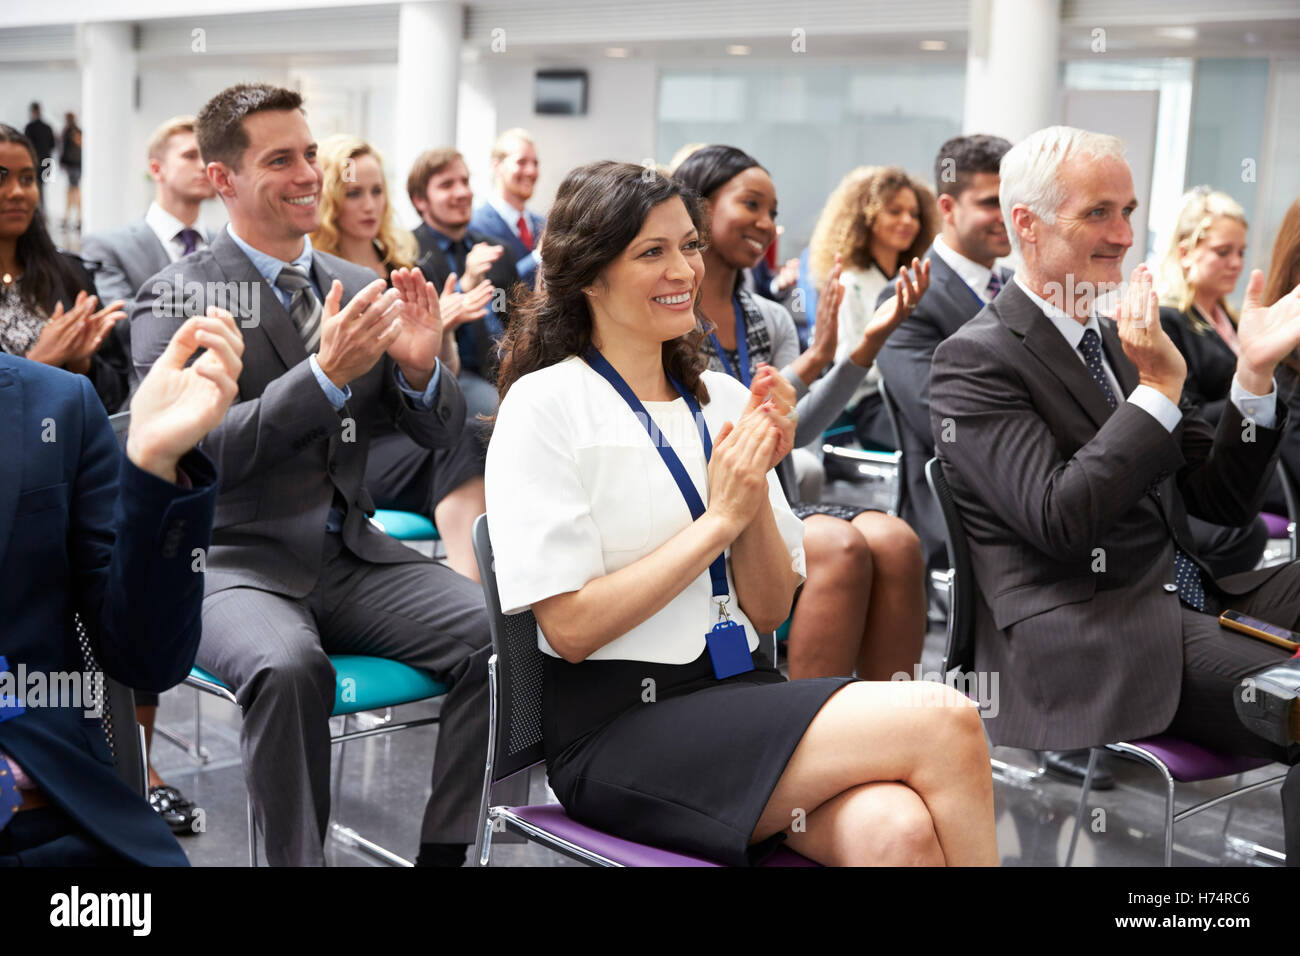 Audience Applauding Speaker After Conference Presentation Stock Photo